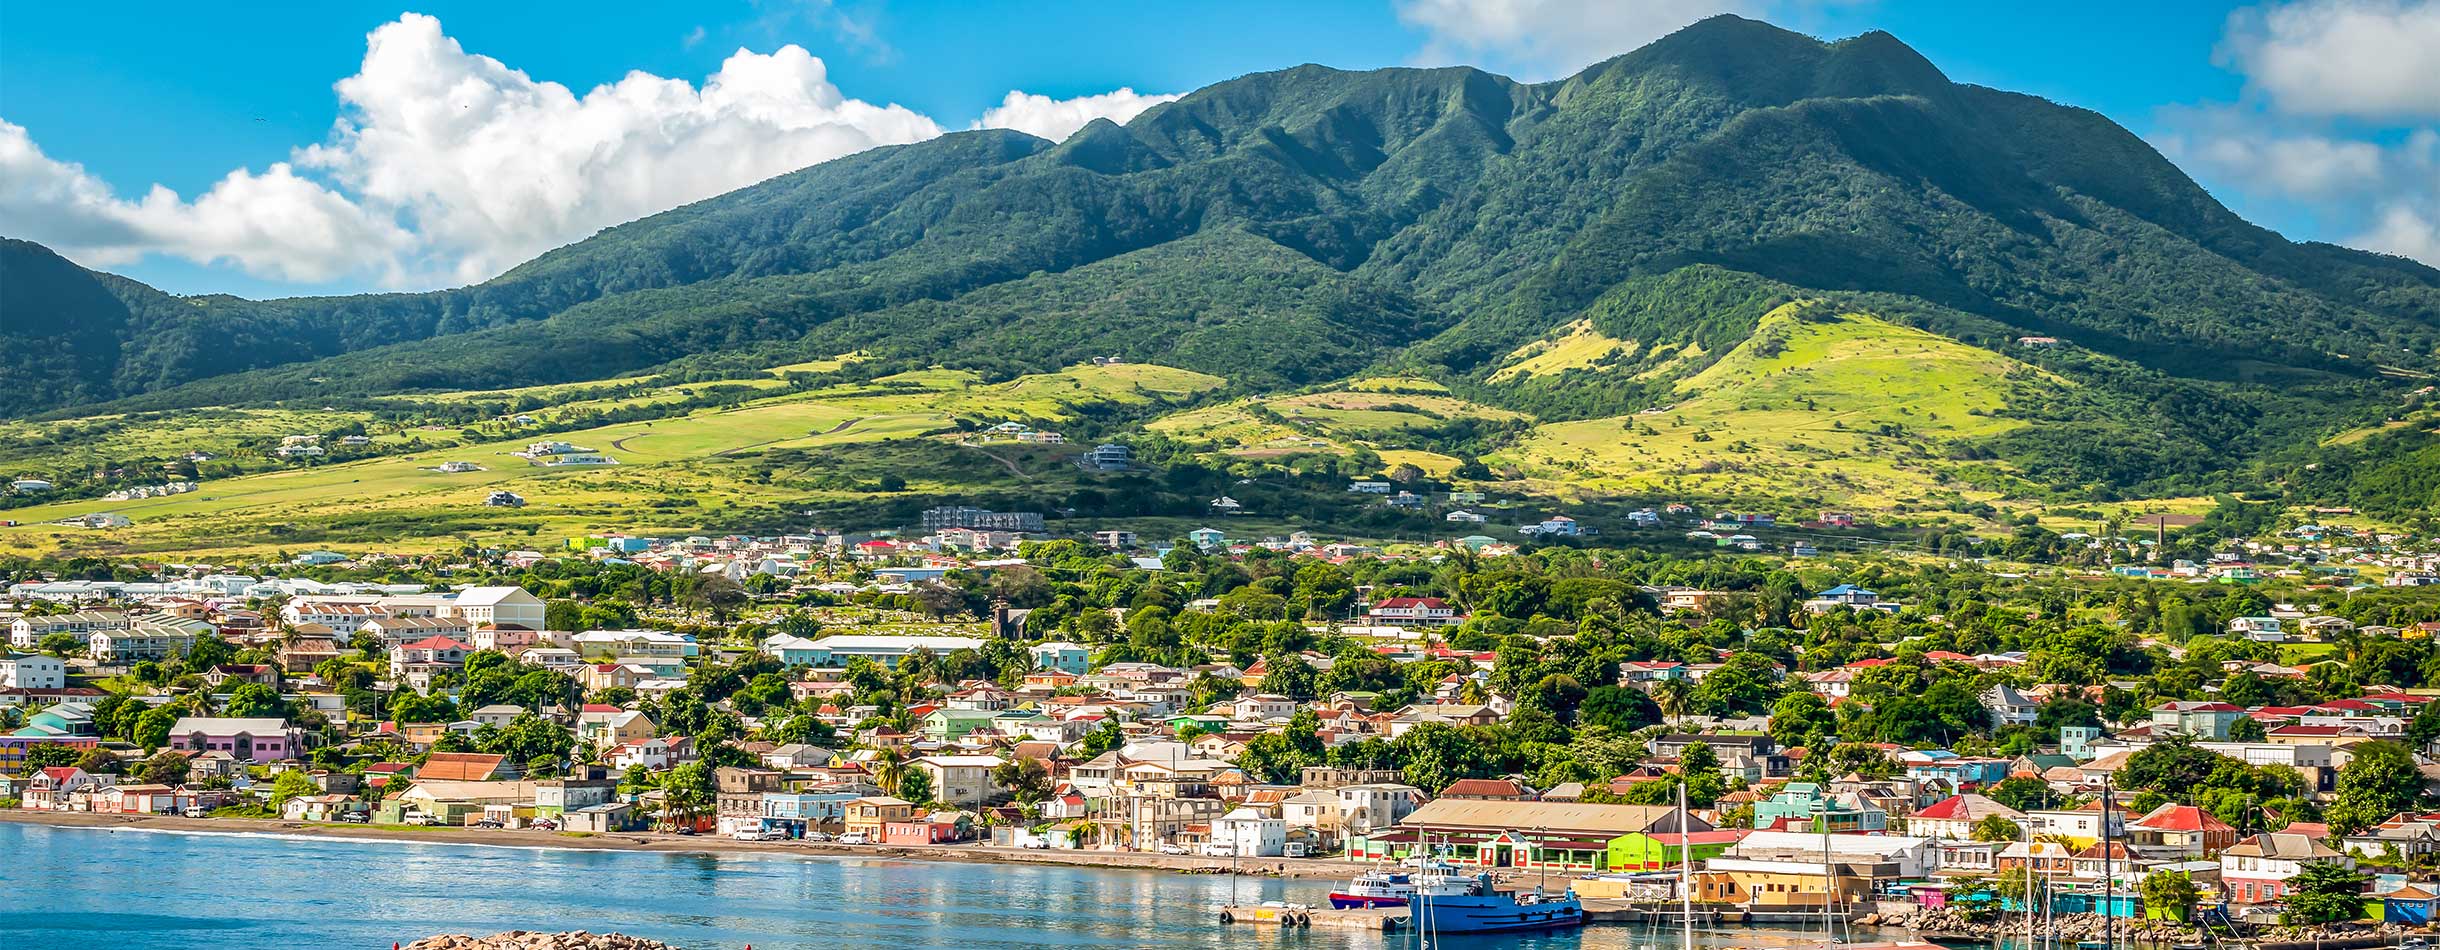 View of St Kitts, Basseterre